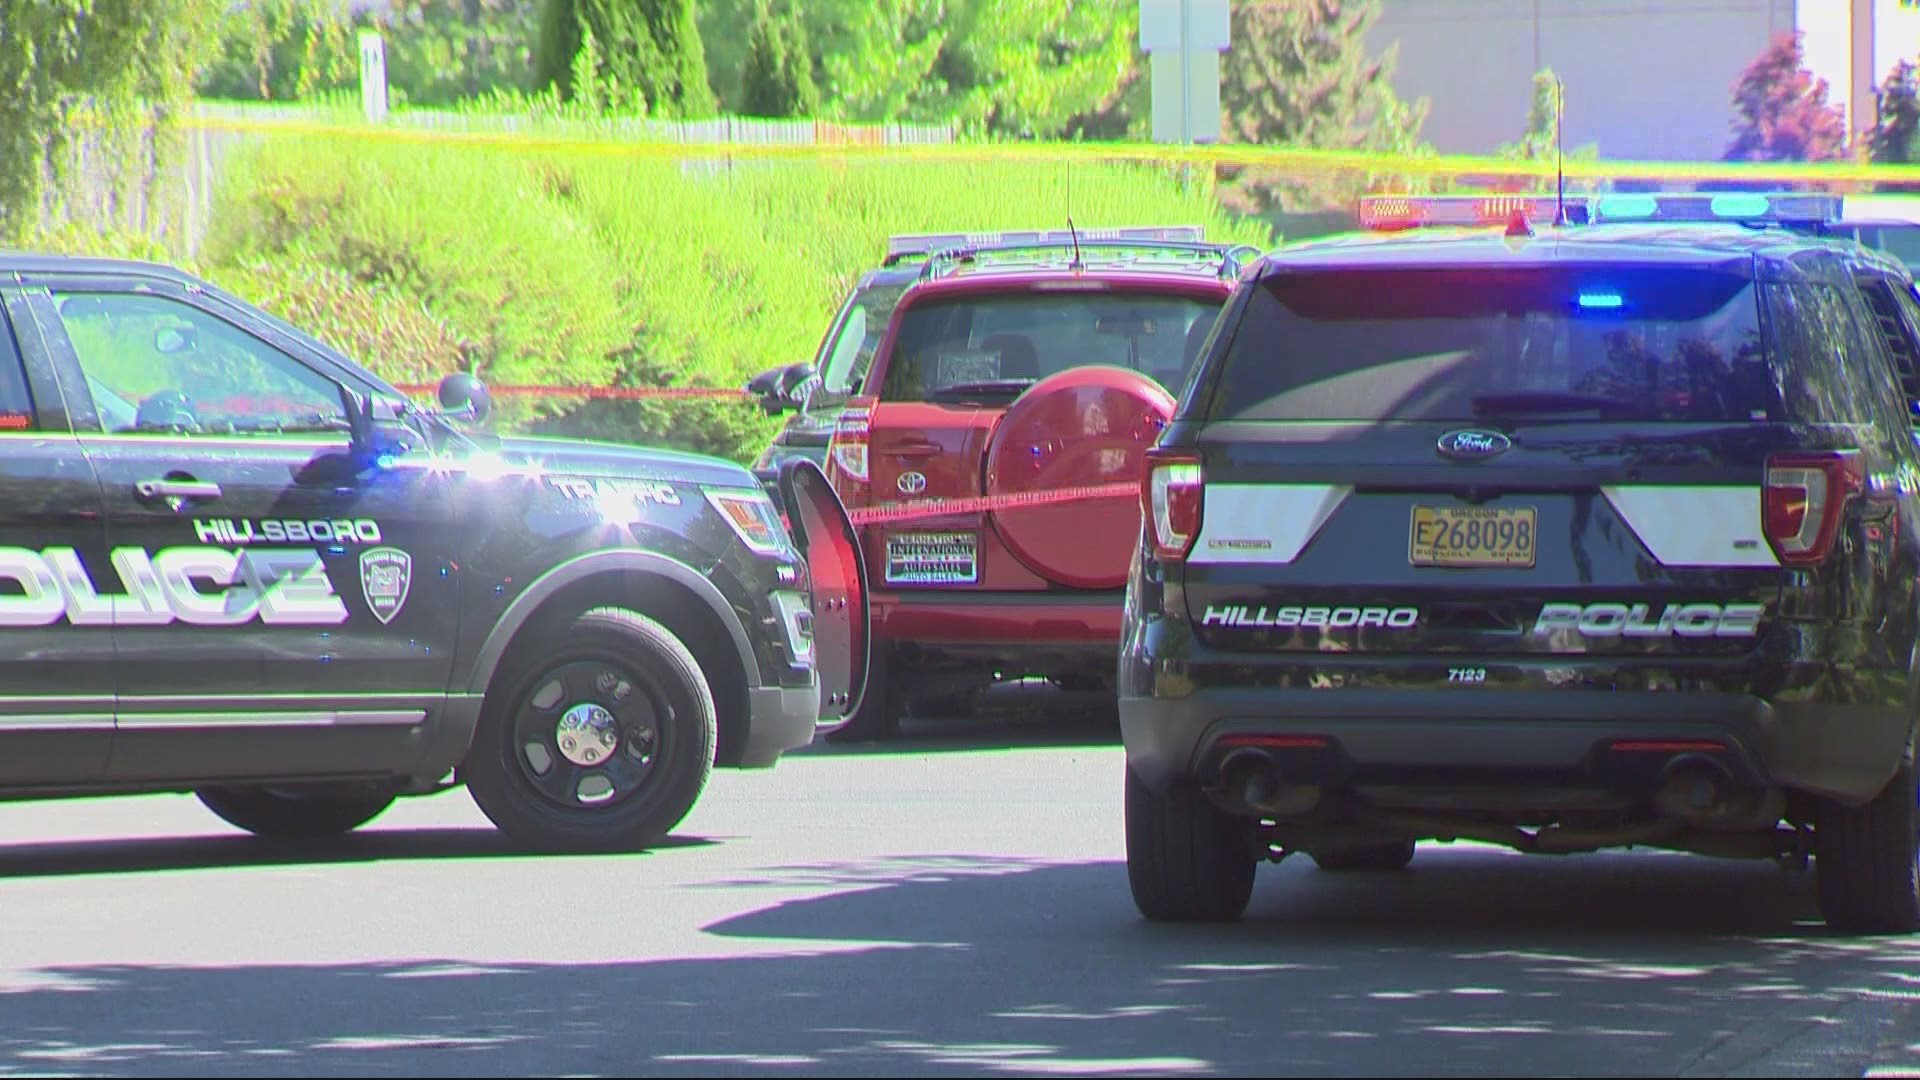 Hillsboro police say a man was shot after he went on a violent rampage, threatening several people and injuring a deputy. Mike Benner has the latest.